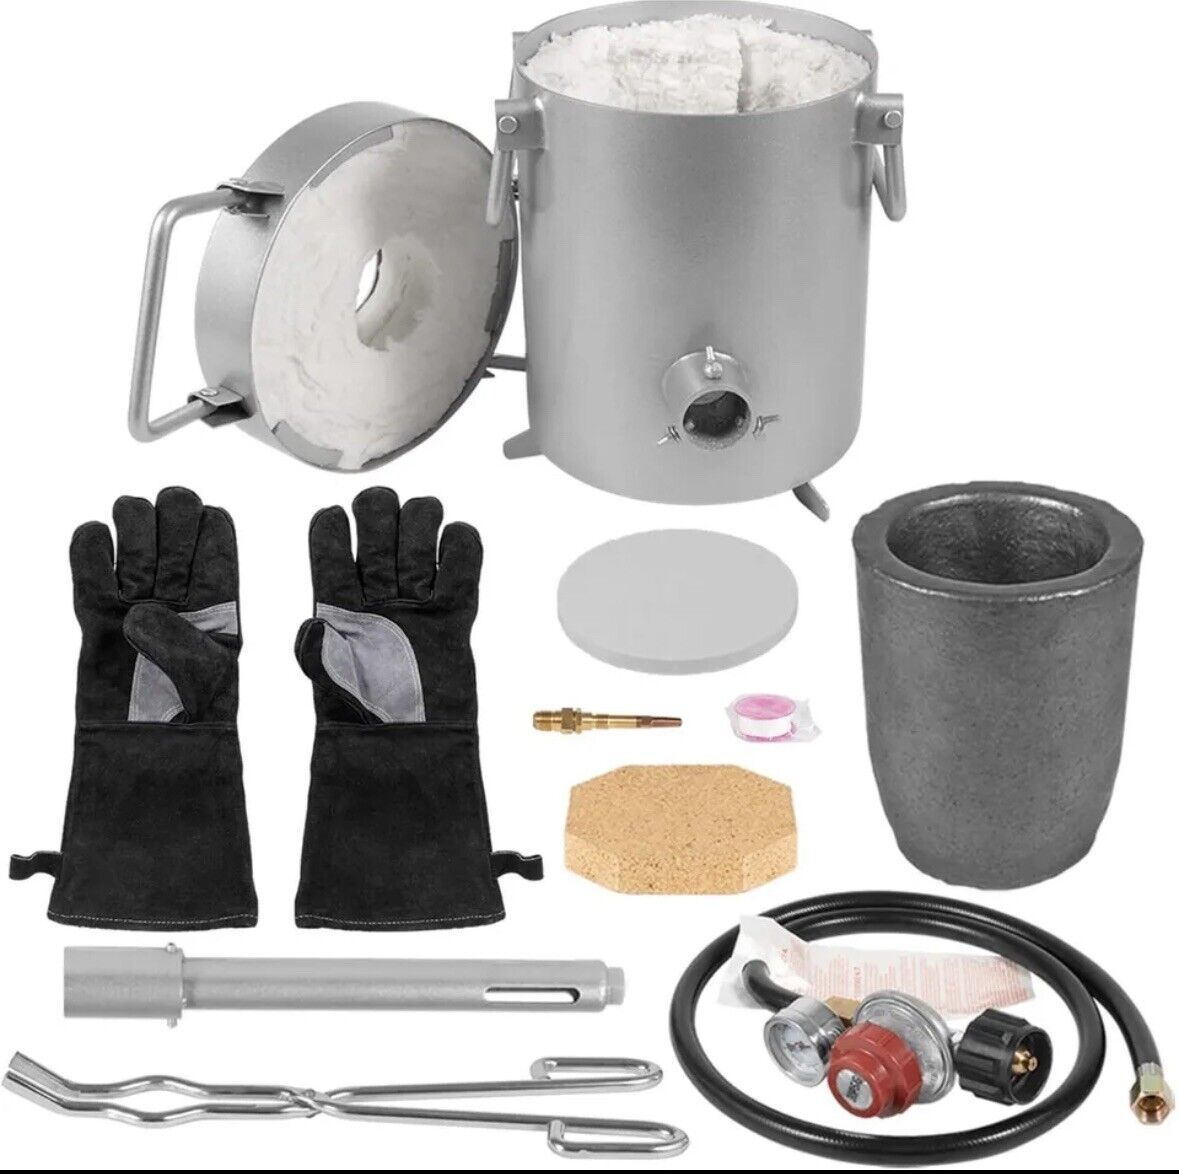 28LB/12.8KG Propane Melting Furnace Deluxe Kit with Crucible and Tongs